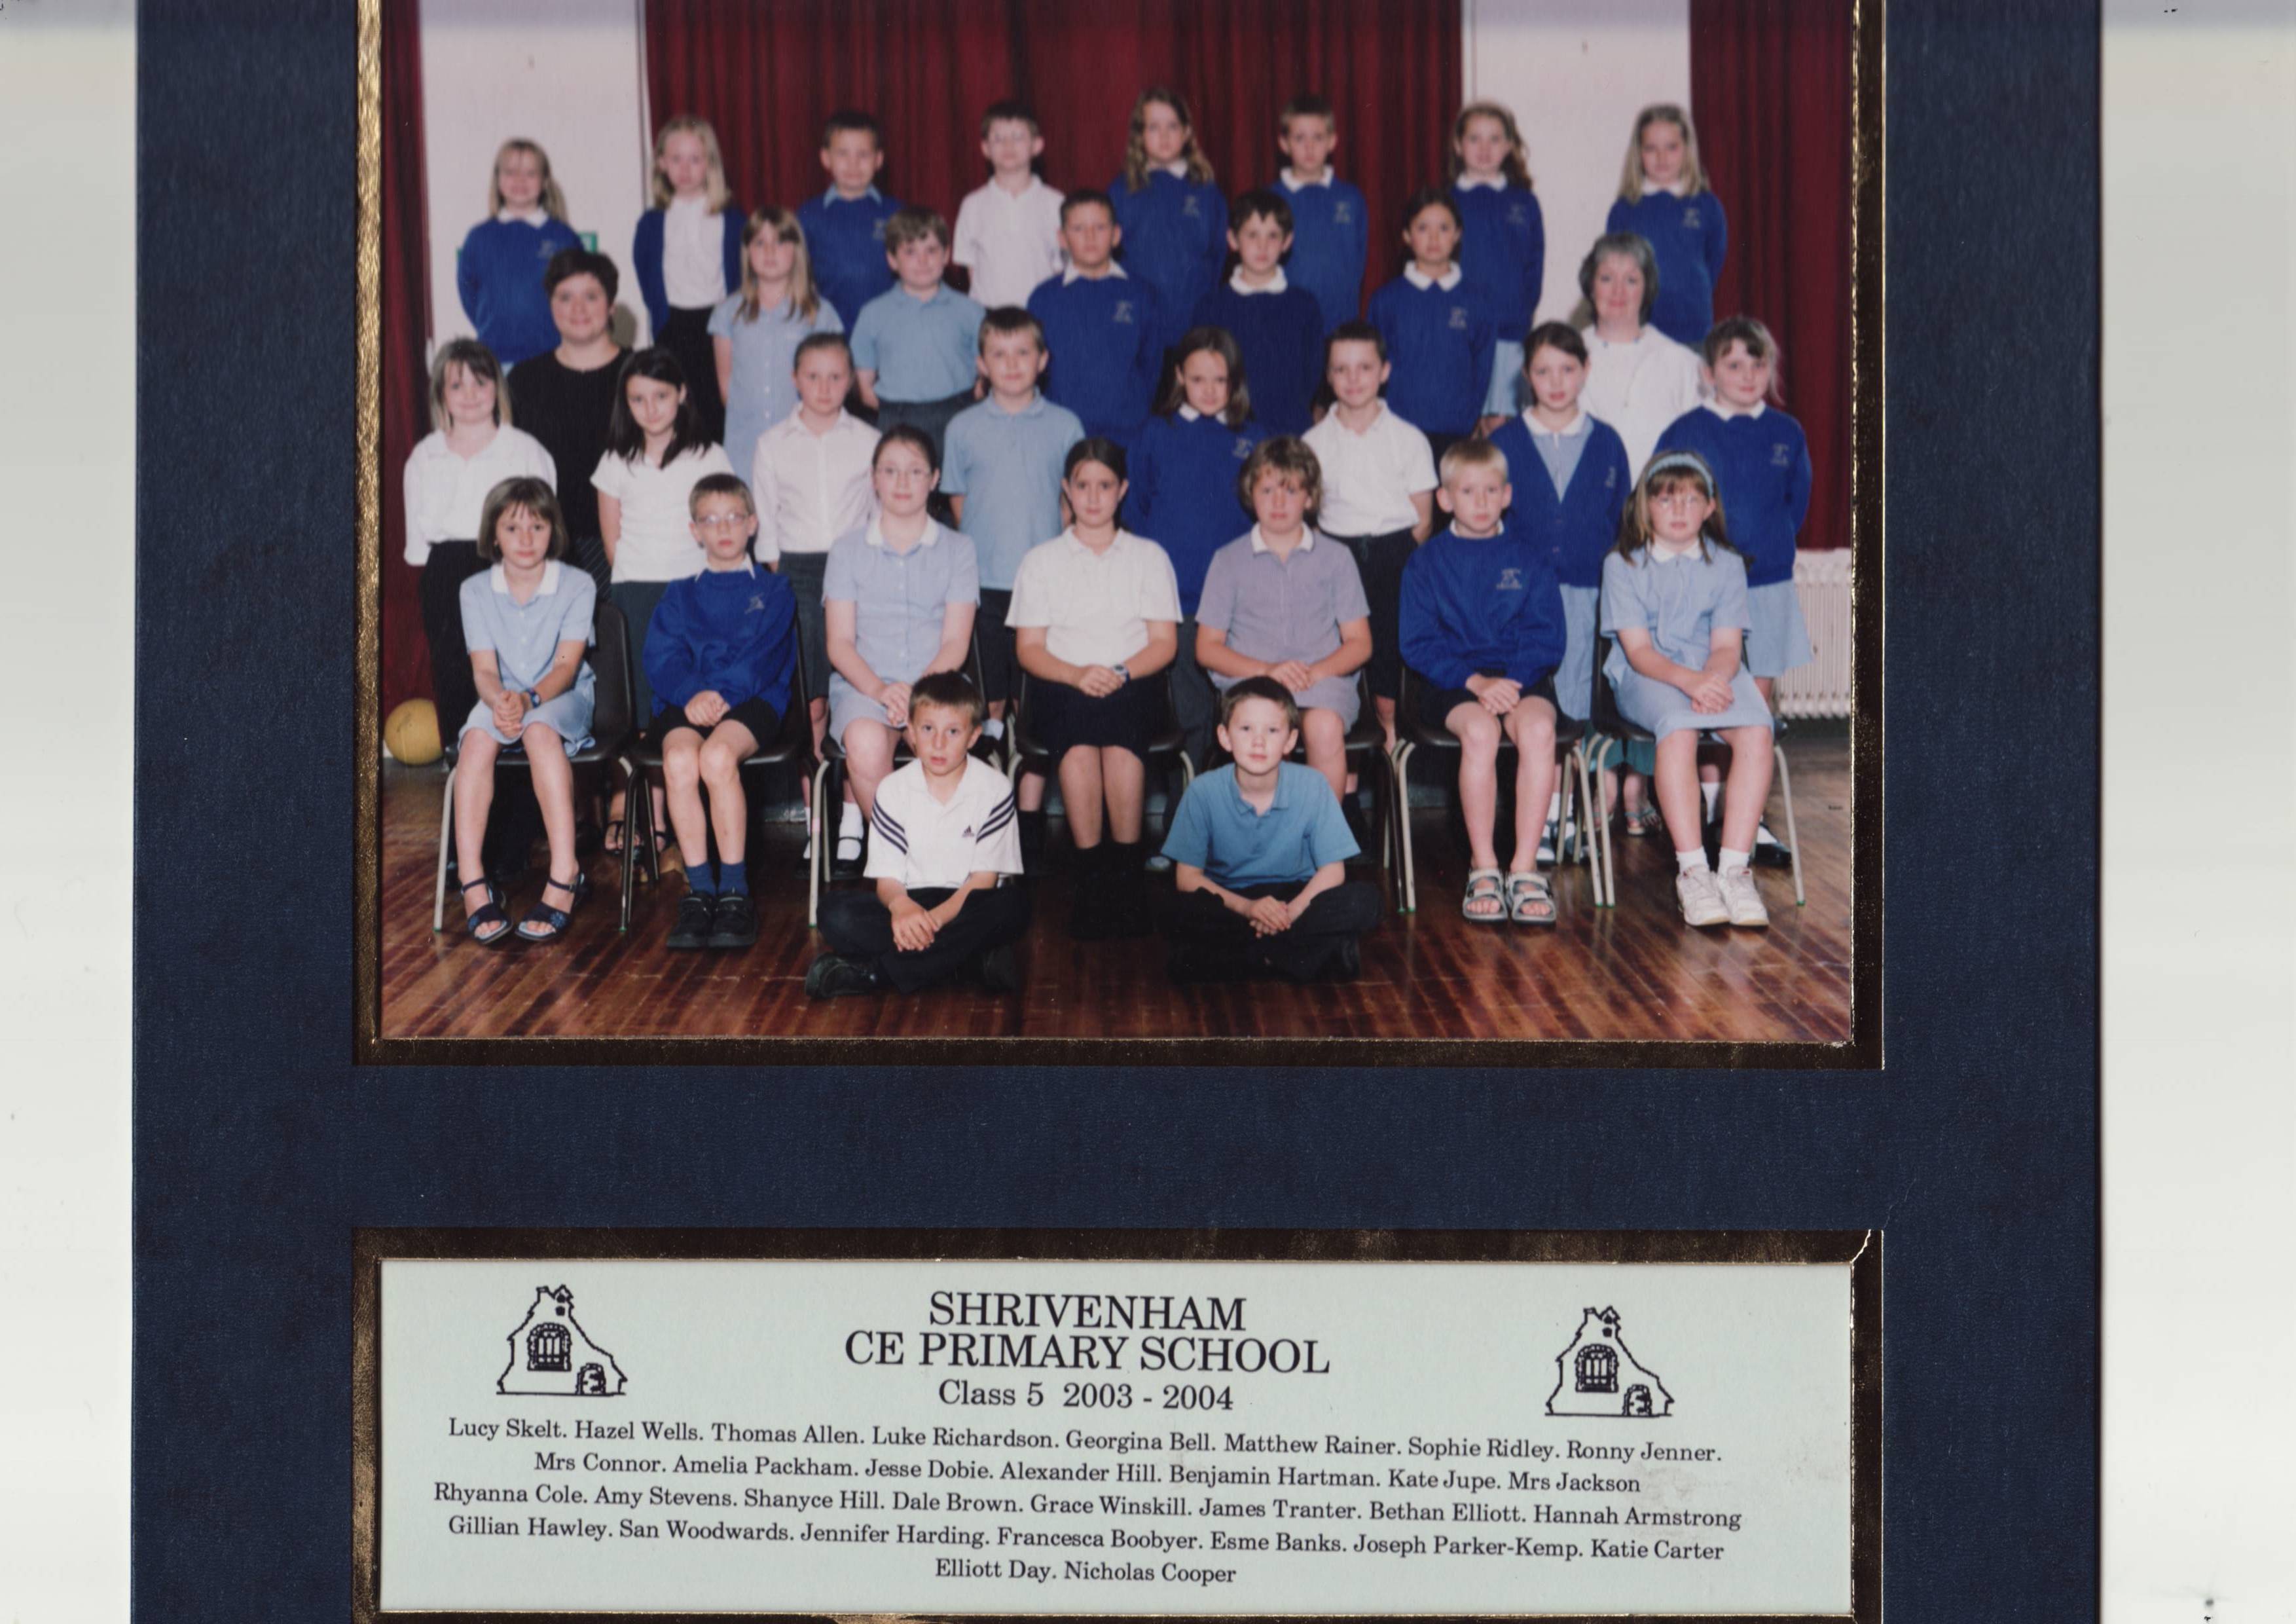 Class 5 of the year 2003-4